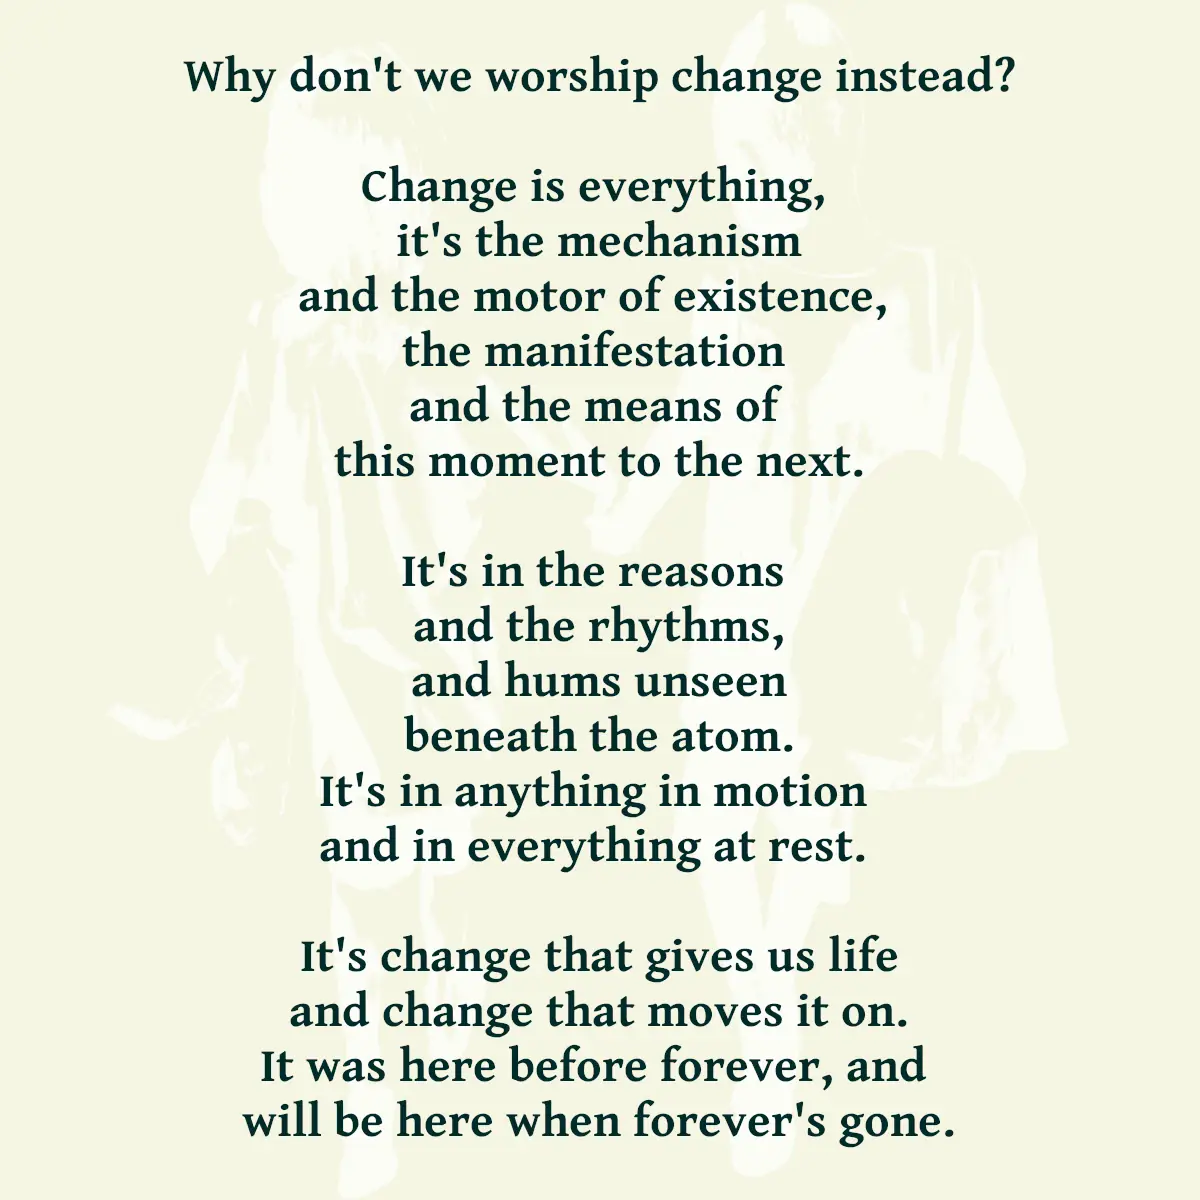 Why don't we worship change instead? Change is everything, it's the mechanism and the motor of existence, the manifestation and the means of this moment to the next. It's in the reasons and the rhythms, and hums unseen beneath the atom. It's in anything in motion and in everything at rest. It's change that gives us life and change that moves it on. It was here before forever, and will be here when forever's gone.